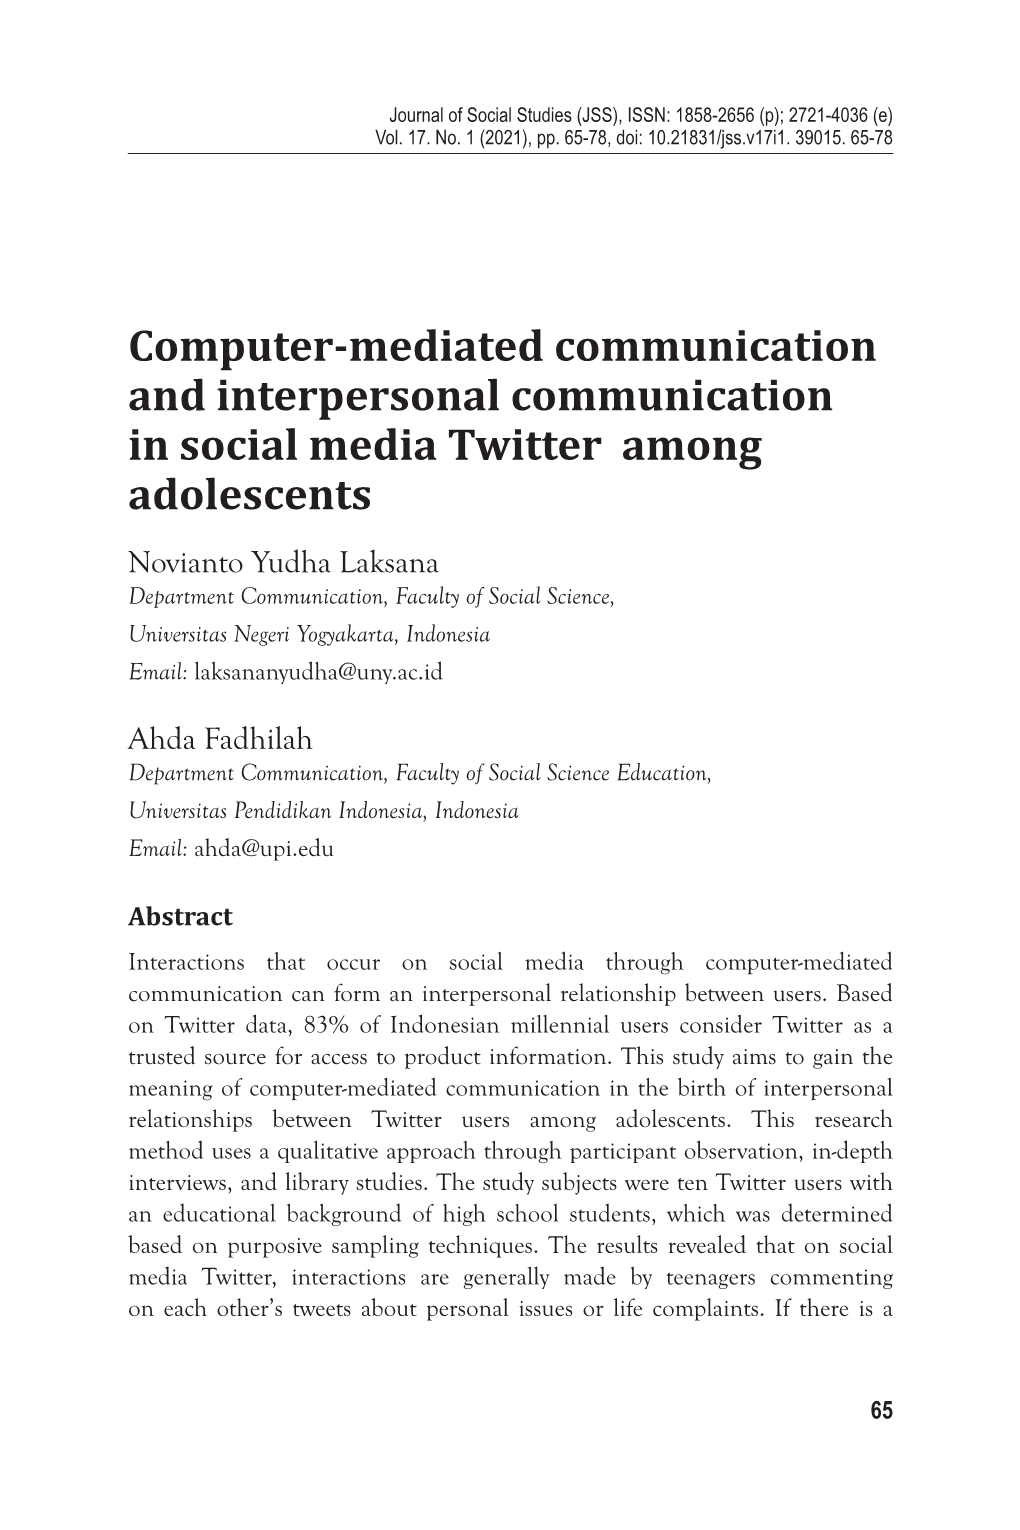 Computer-Mediated Communication and Interpersonal Communication in Social Media Twitter Among Adolescents